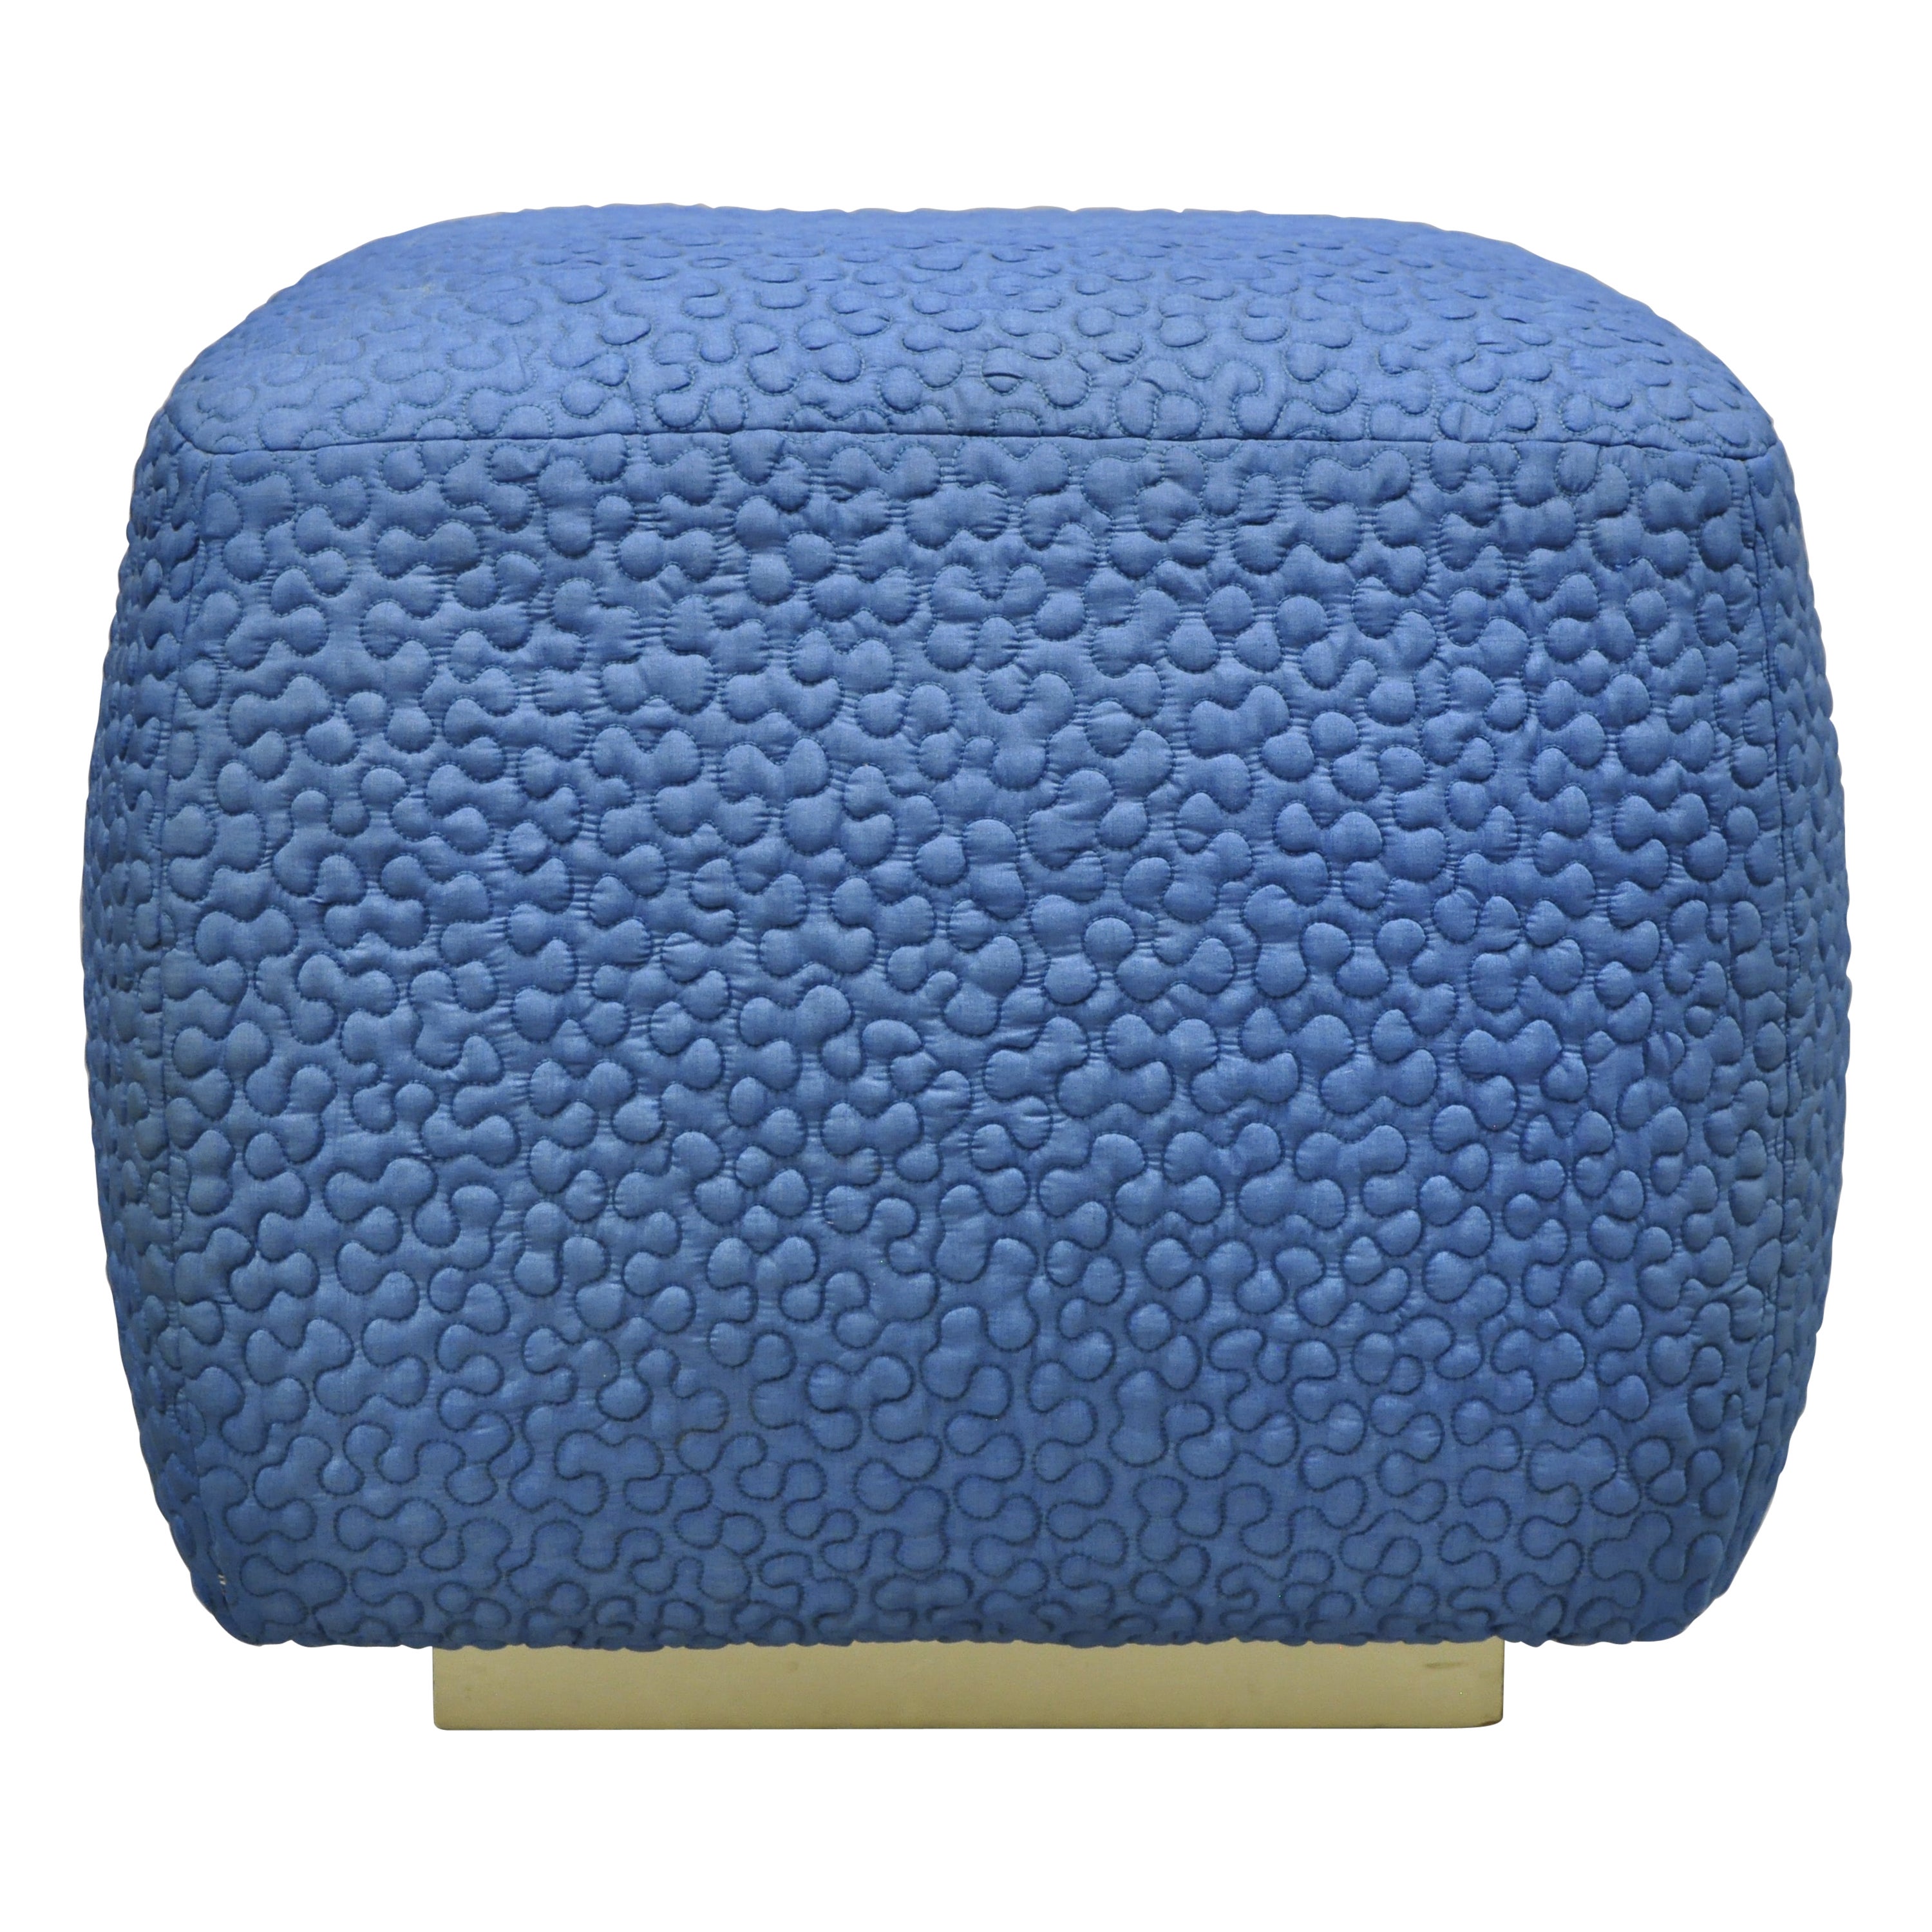 Vintage 1960s Square Pouf Ottoman Blue Stitched Fabric Rolling Casters Wheels For Sale